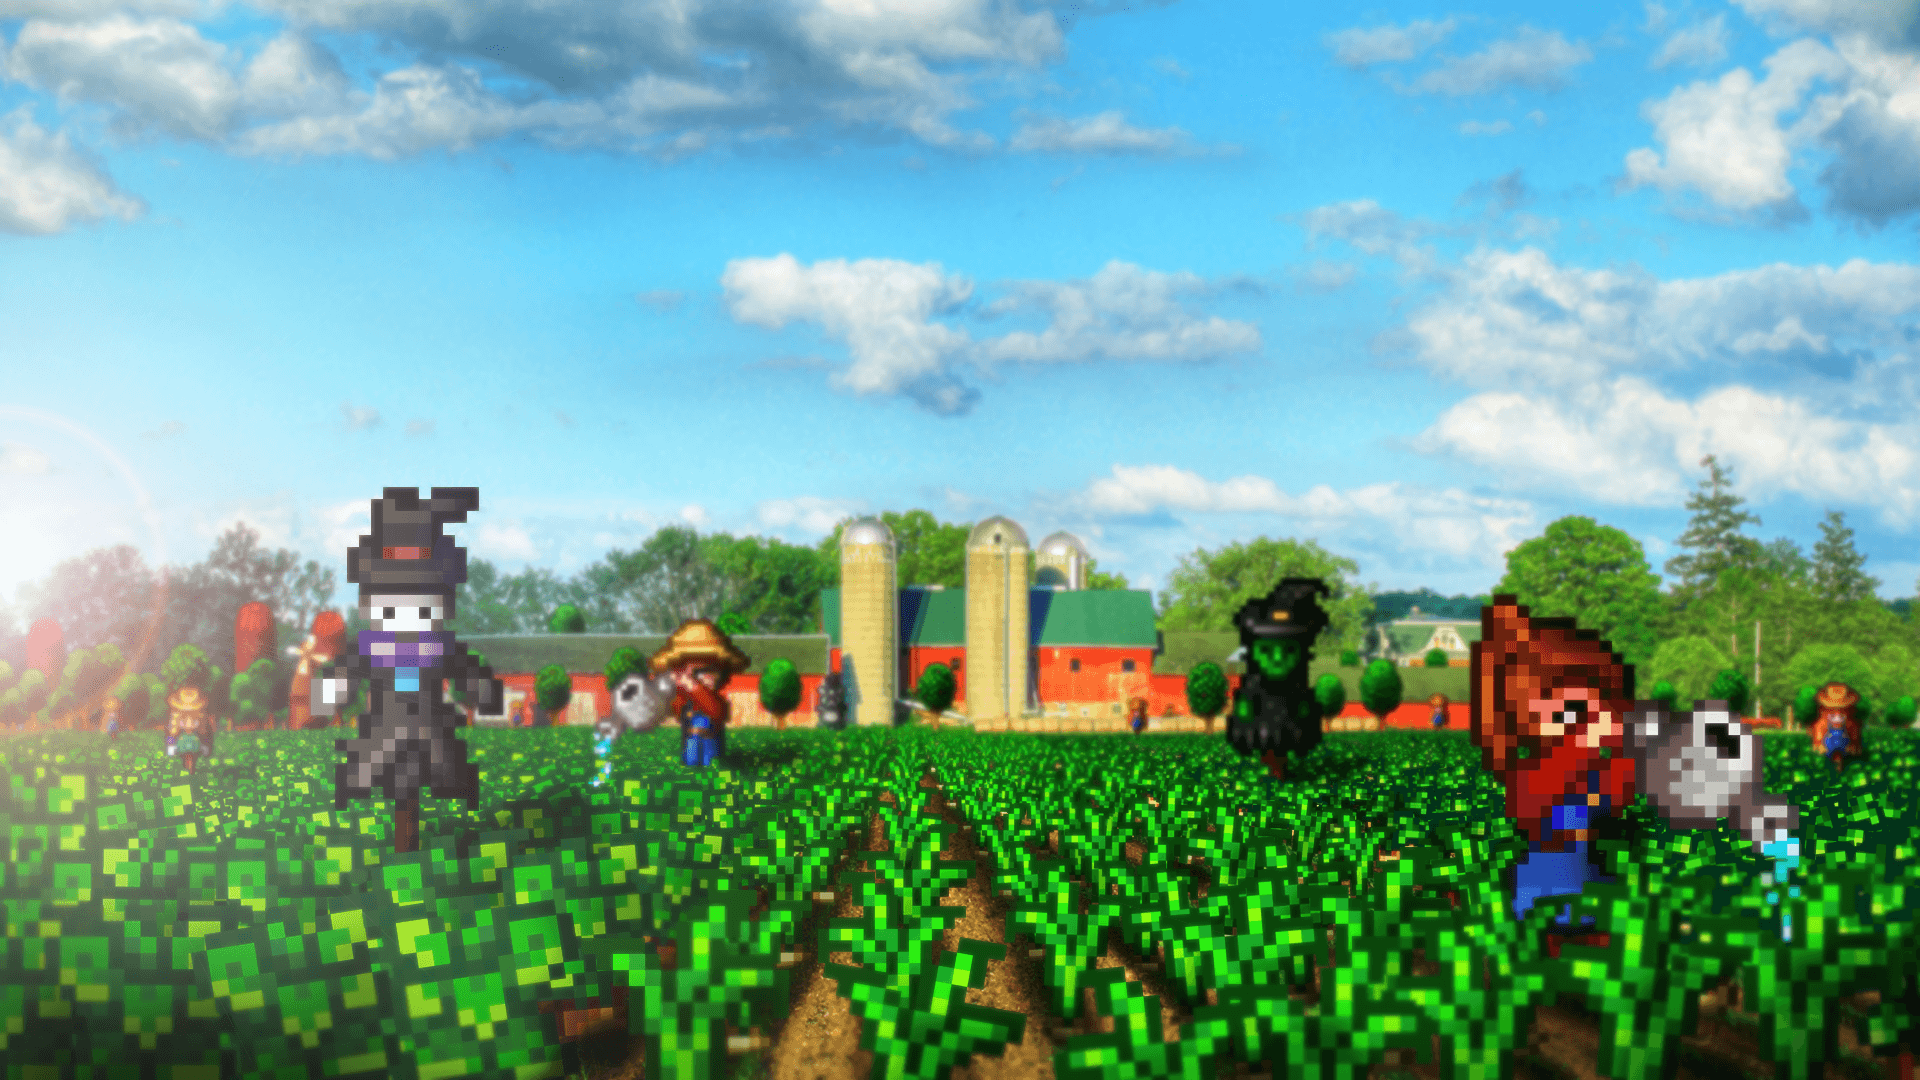 I made a 1920x1080 HD wallpaper using Stardew Valley sprites